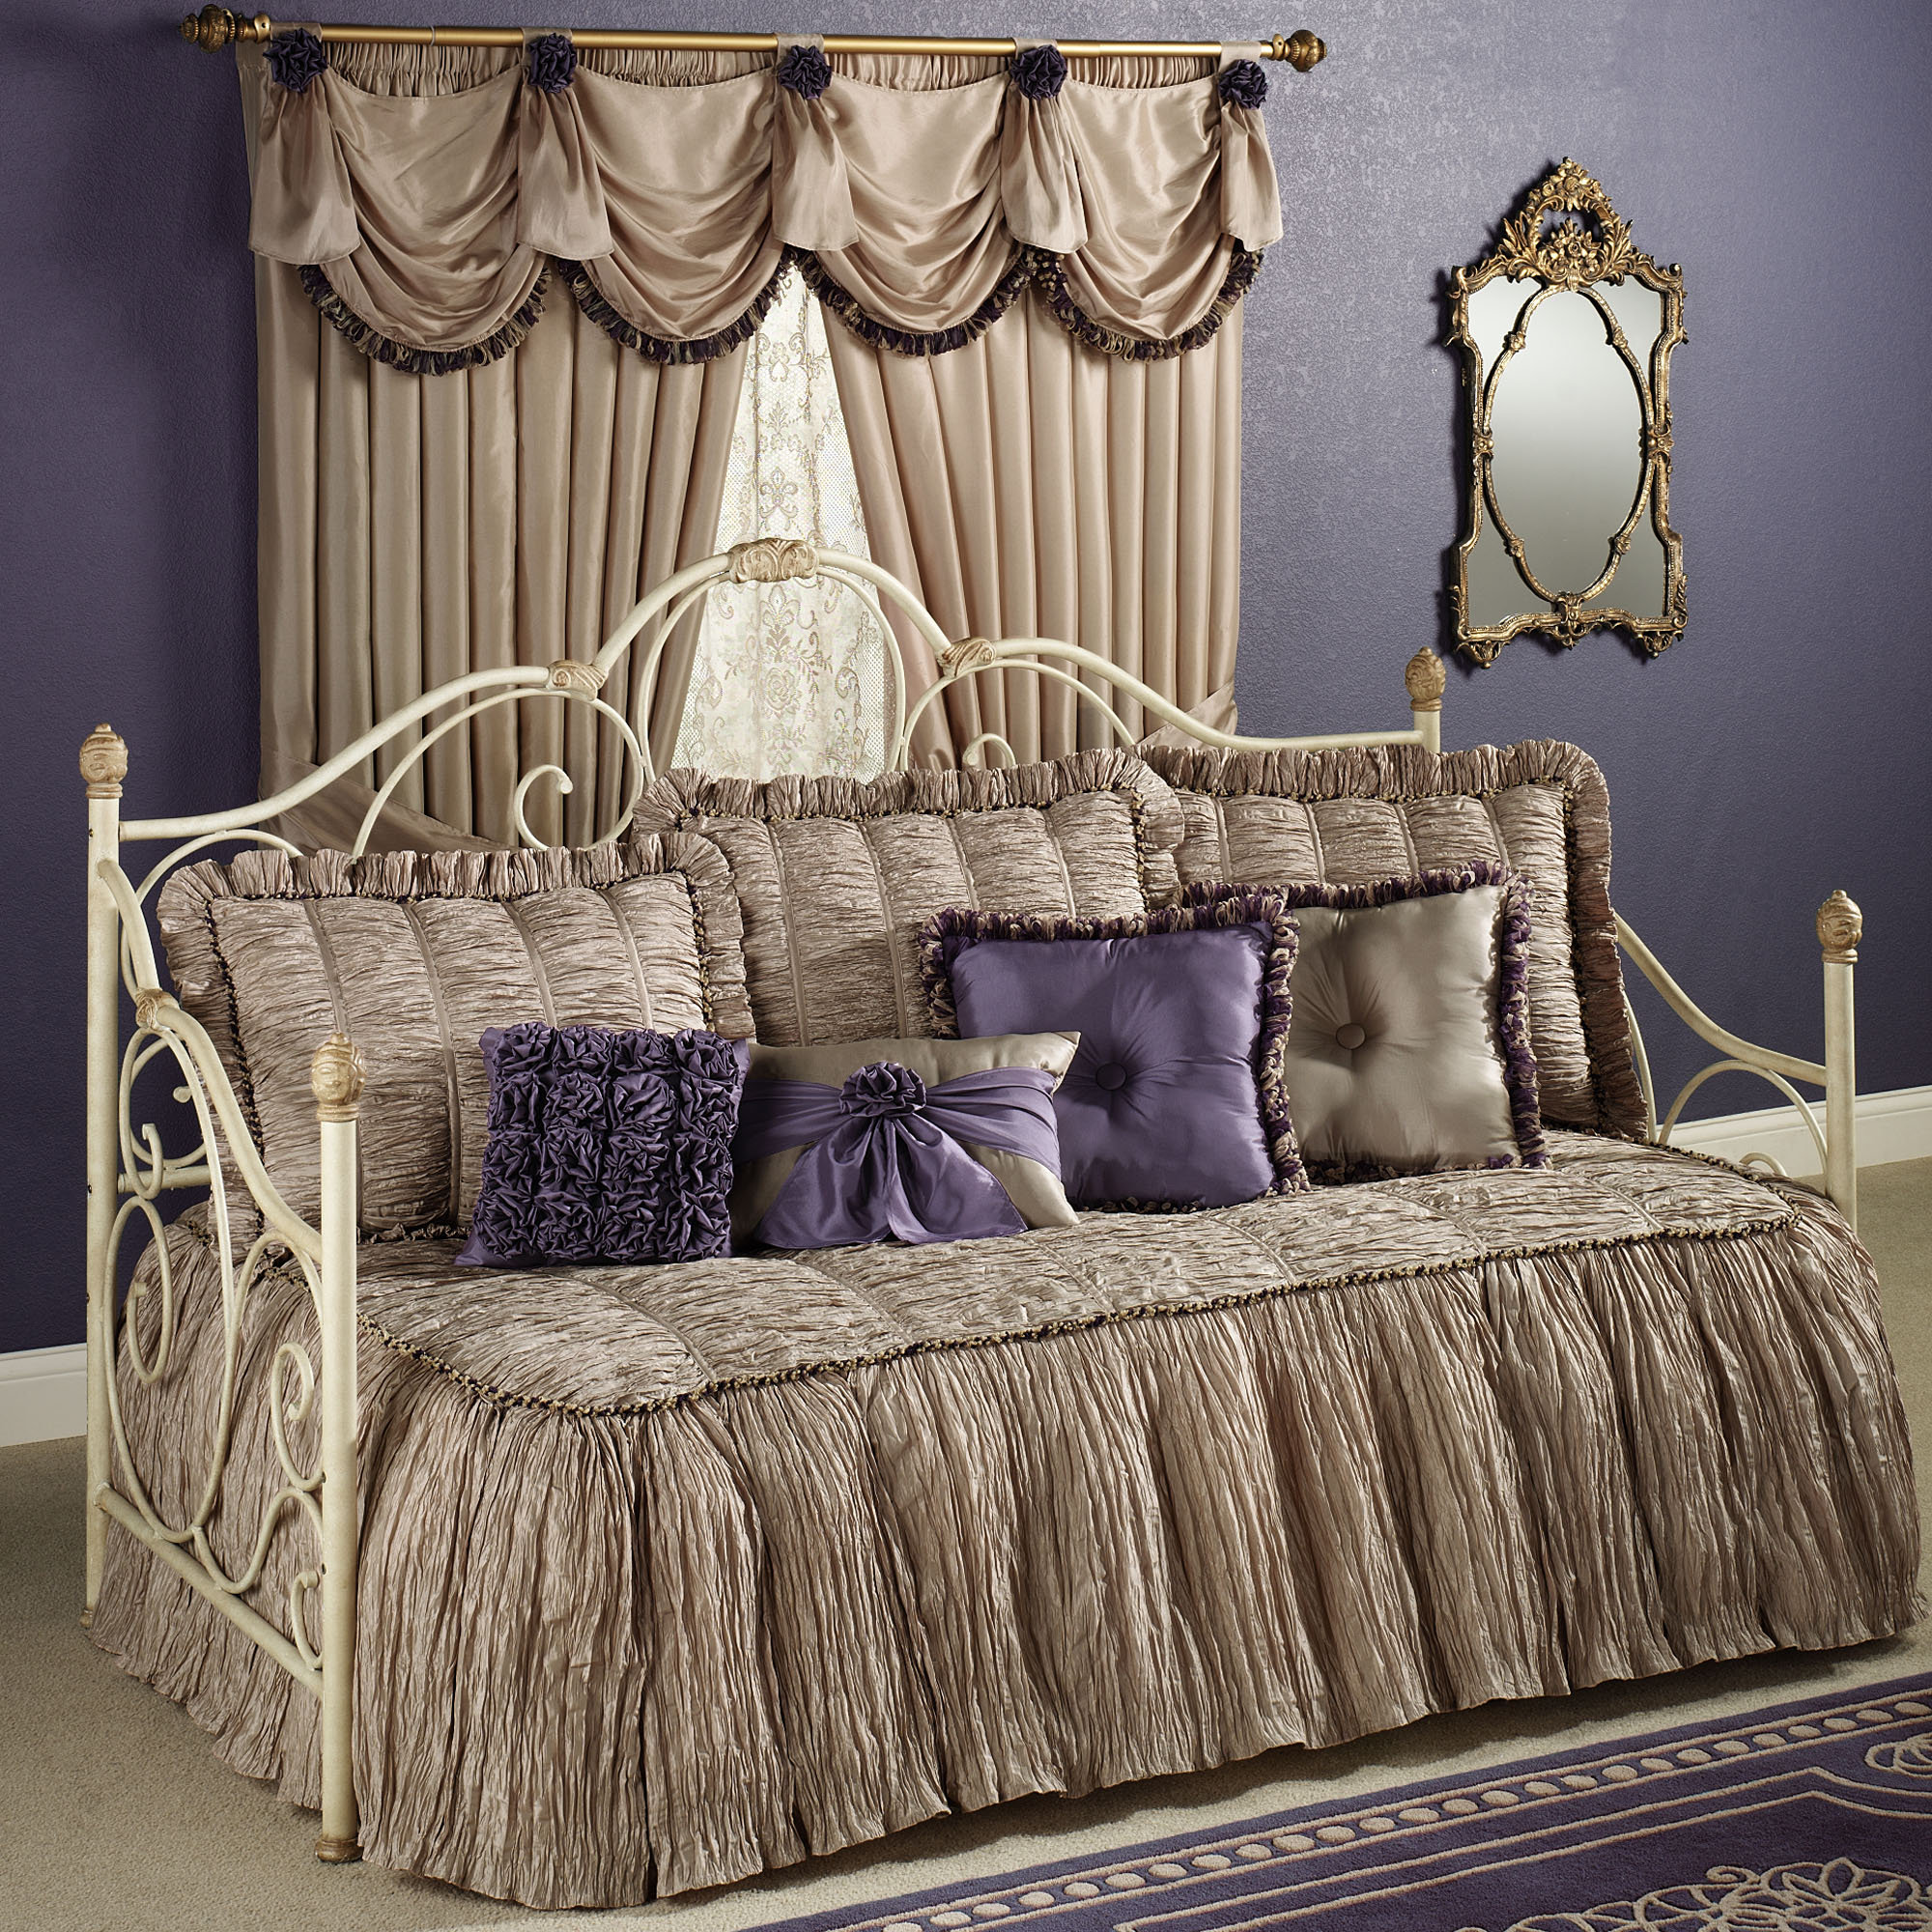 daybed bedding sets clearance photo - 5